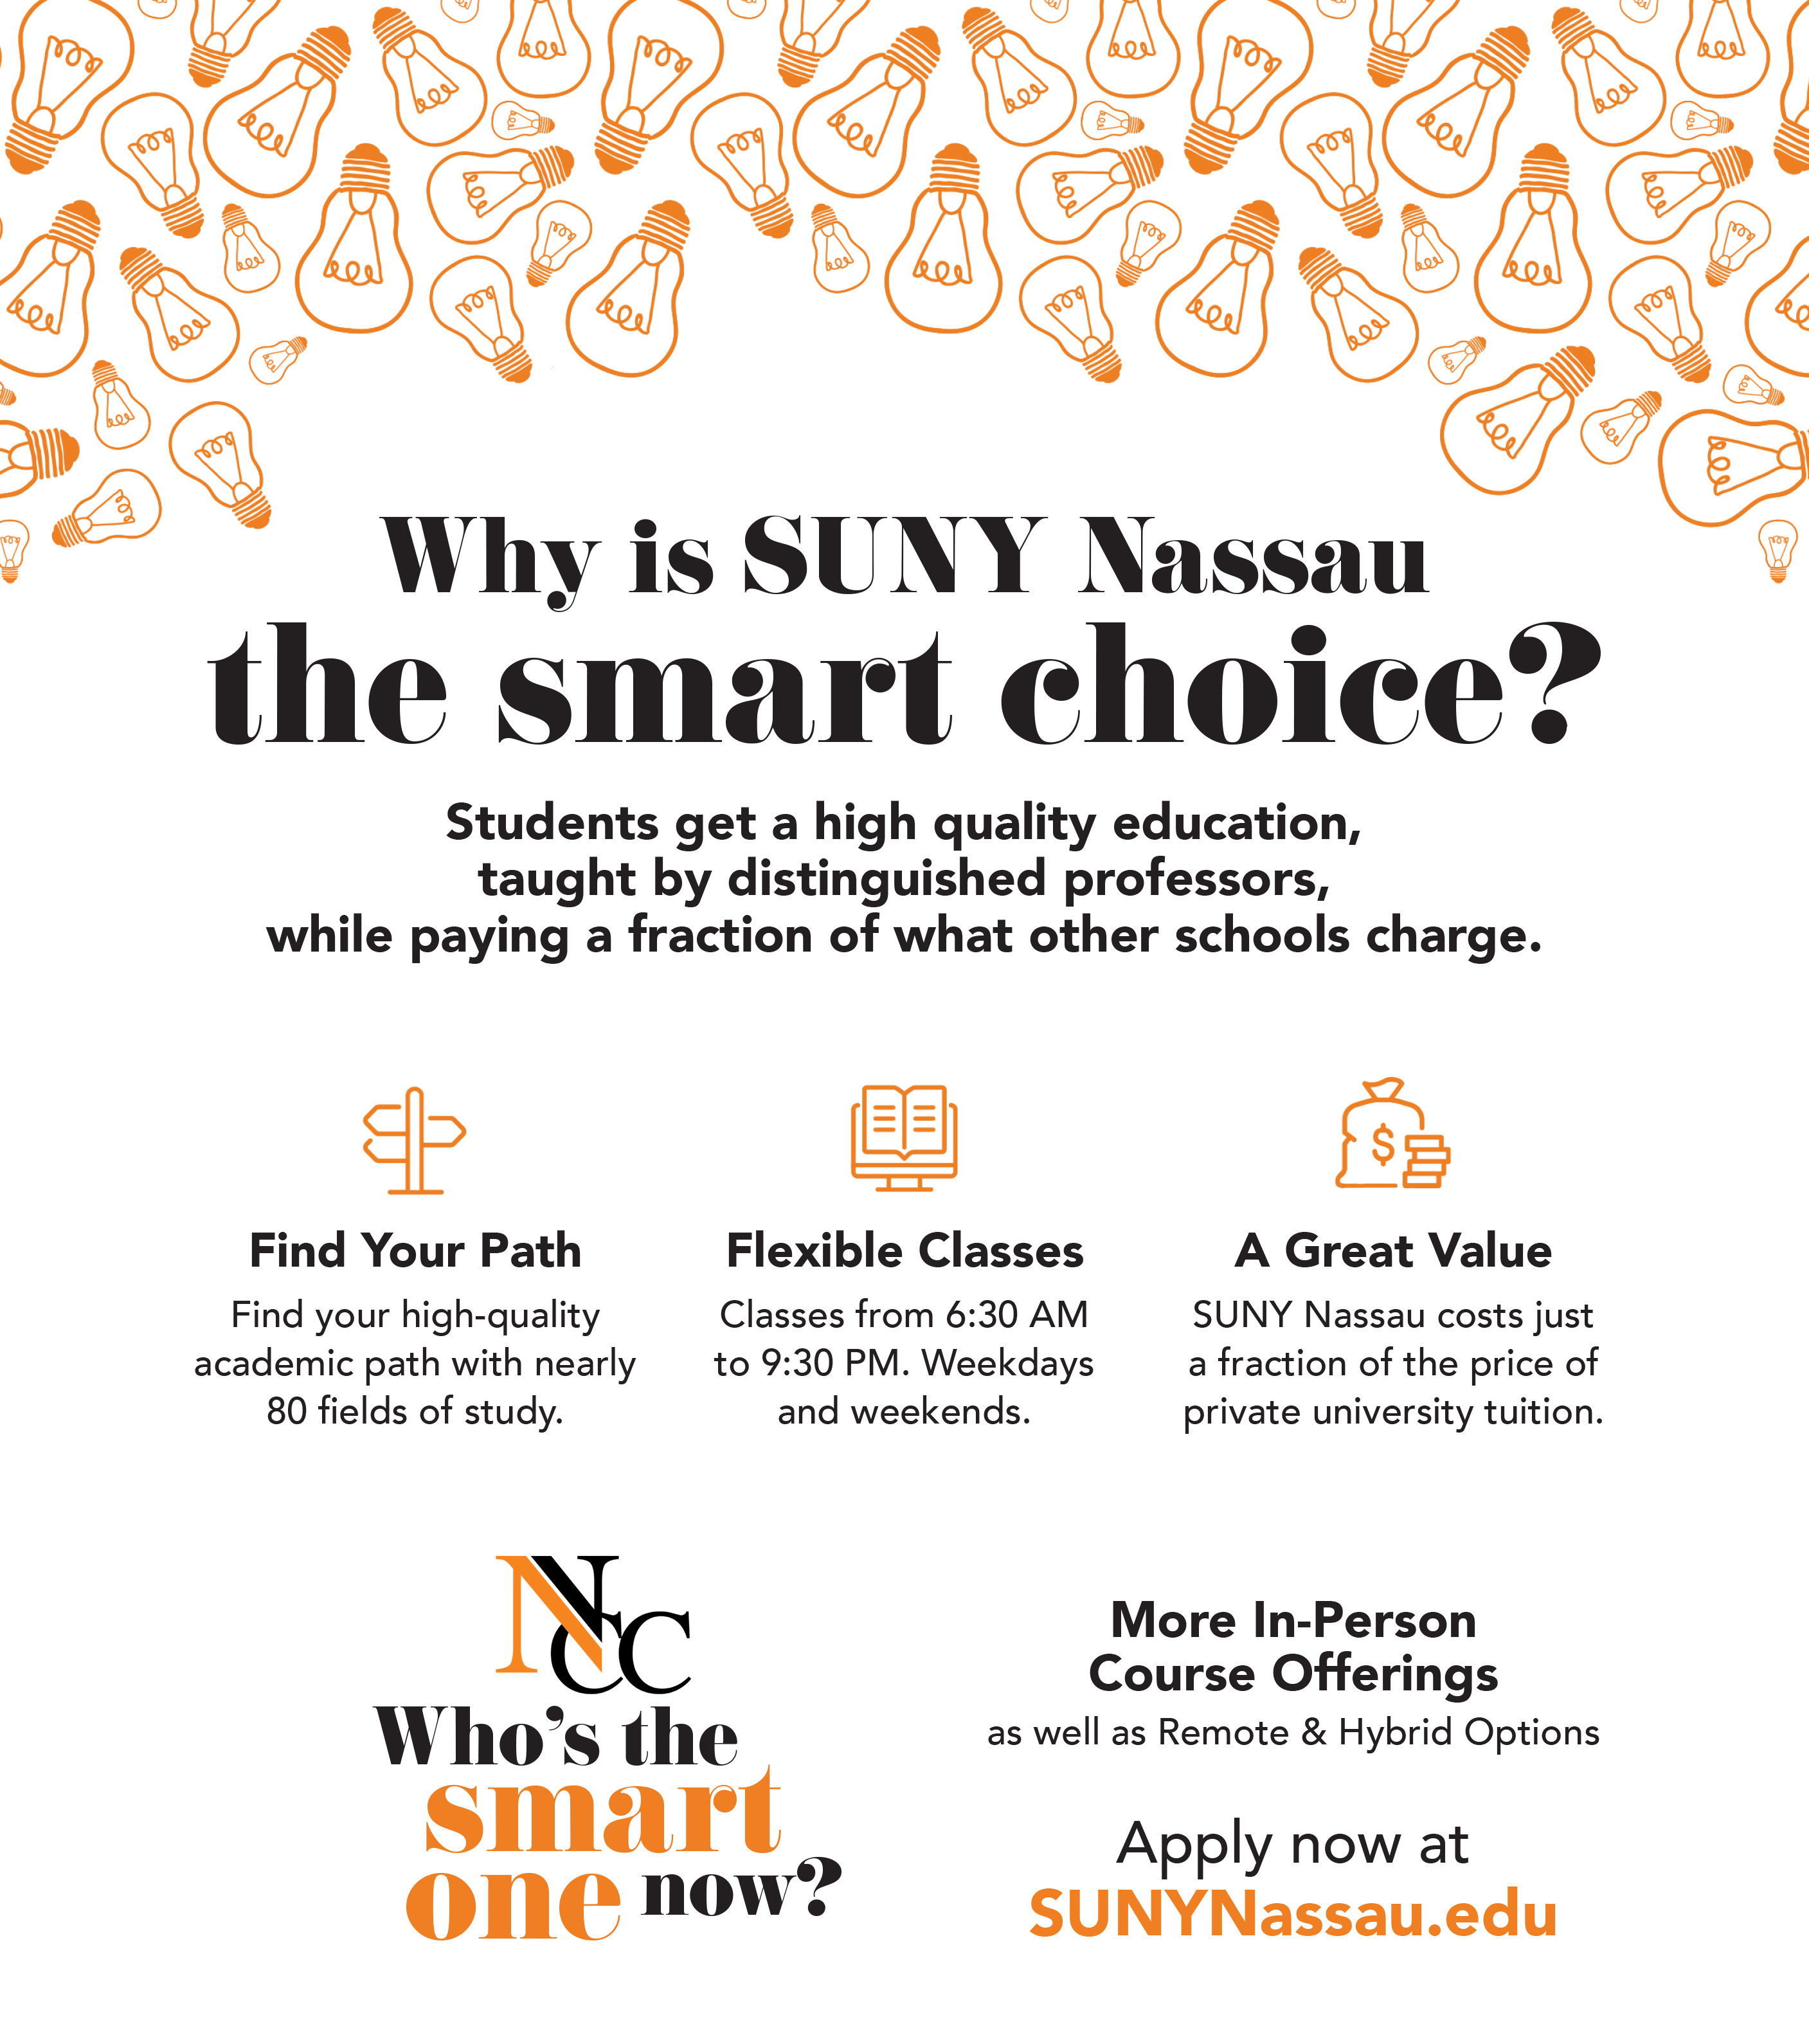 Why is USUNY Nassu the smart choice? Students get a hi quality education, taught by distinguished professors, while paying a fraction of what other school charge. Find your path, find you high-quality academic path with nearly 80 fileds of study. Flexible Classes, Classes from 6:30am to 9:30pm. weekdays and weekends. A great value, SUNY Nassau costs just a fraction of the price of private university tuition. Who's the smart one now? More in person course offerings as well as remote and hybrid options. Apply now at SUNYNassu.edu